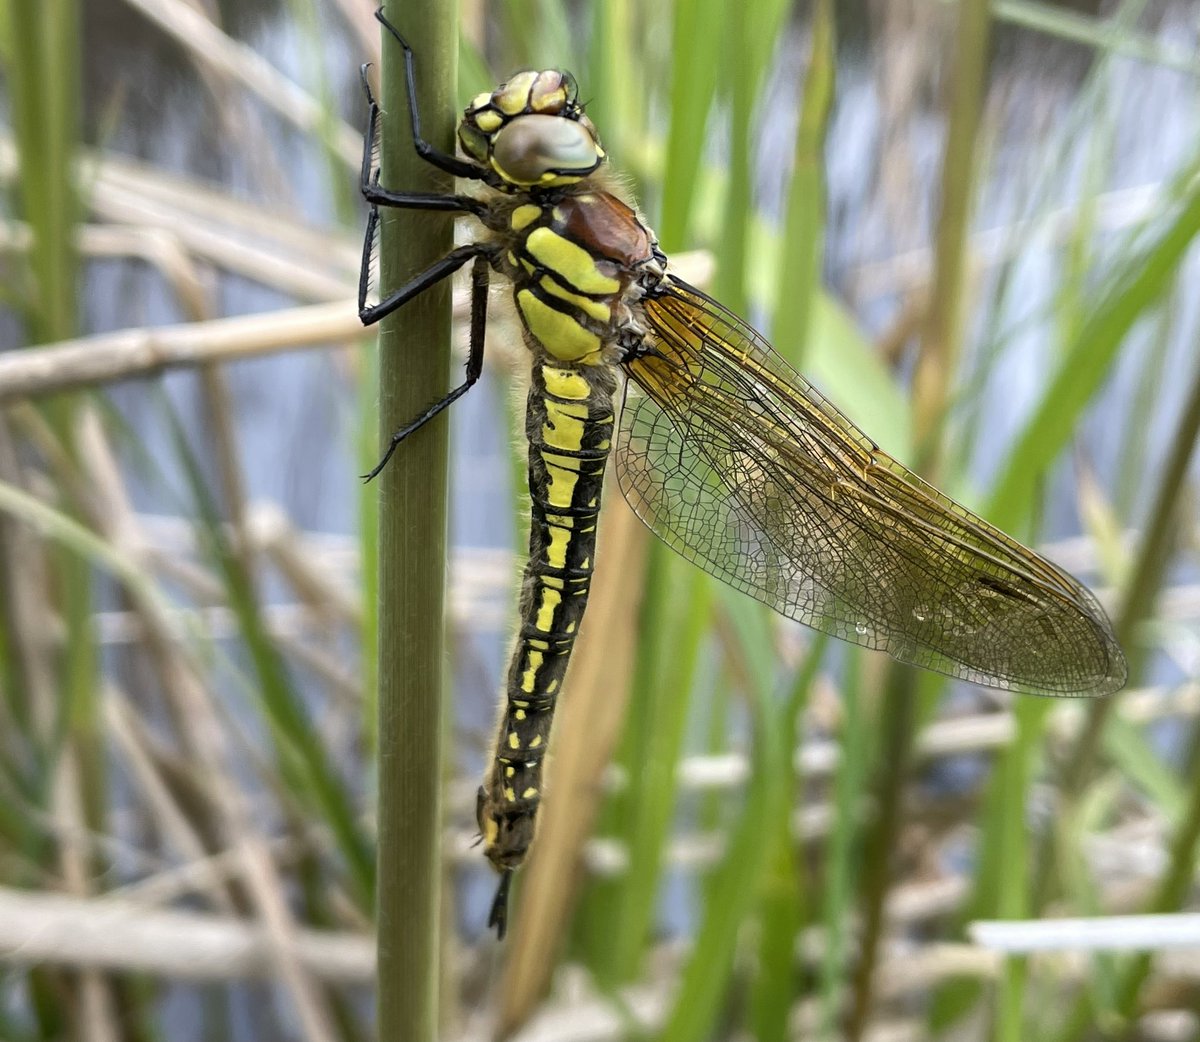 Our #NNR team spotted their first Hairy Hawker of the year last week, newly emerged and still unfolding its wings. Hairy Hawkers are one of the first dragonfly species to appear here in the spring. Have you spotted any dragonflies yet?